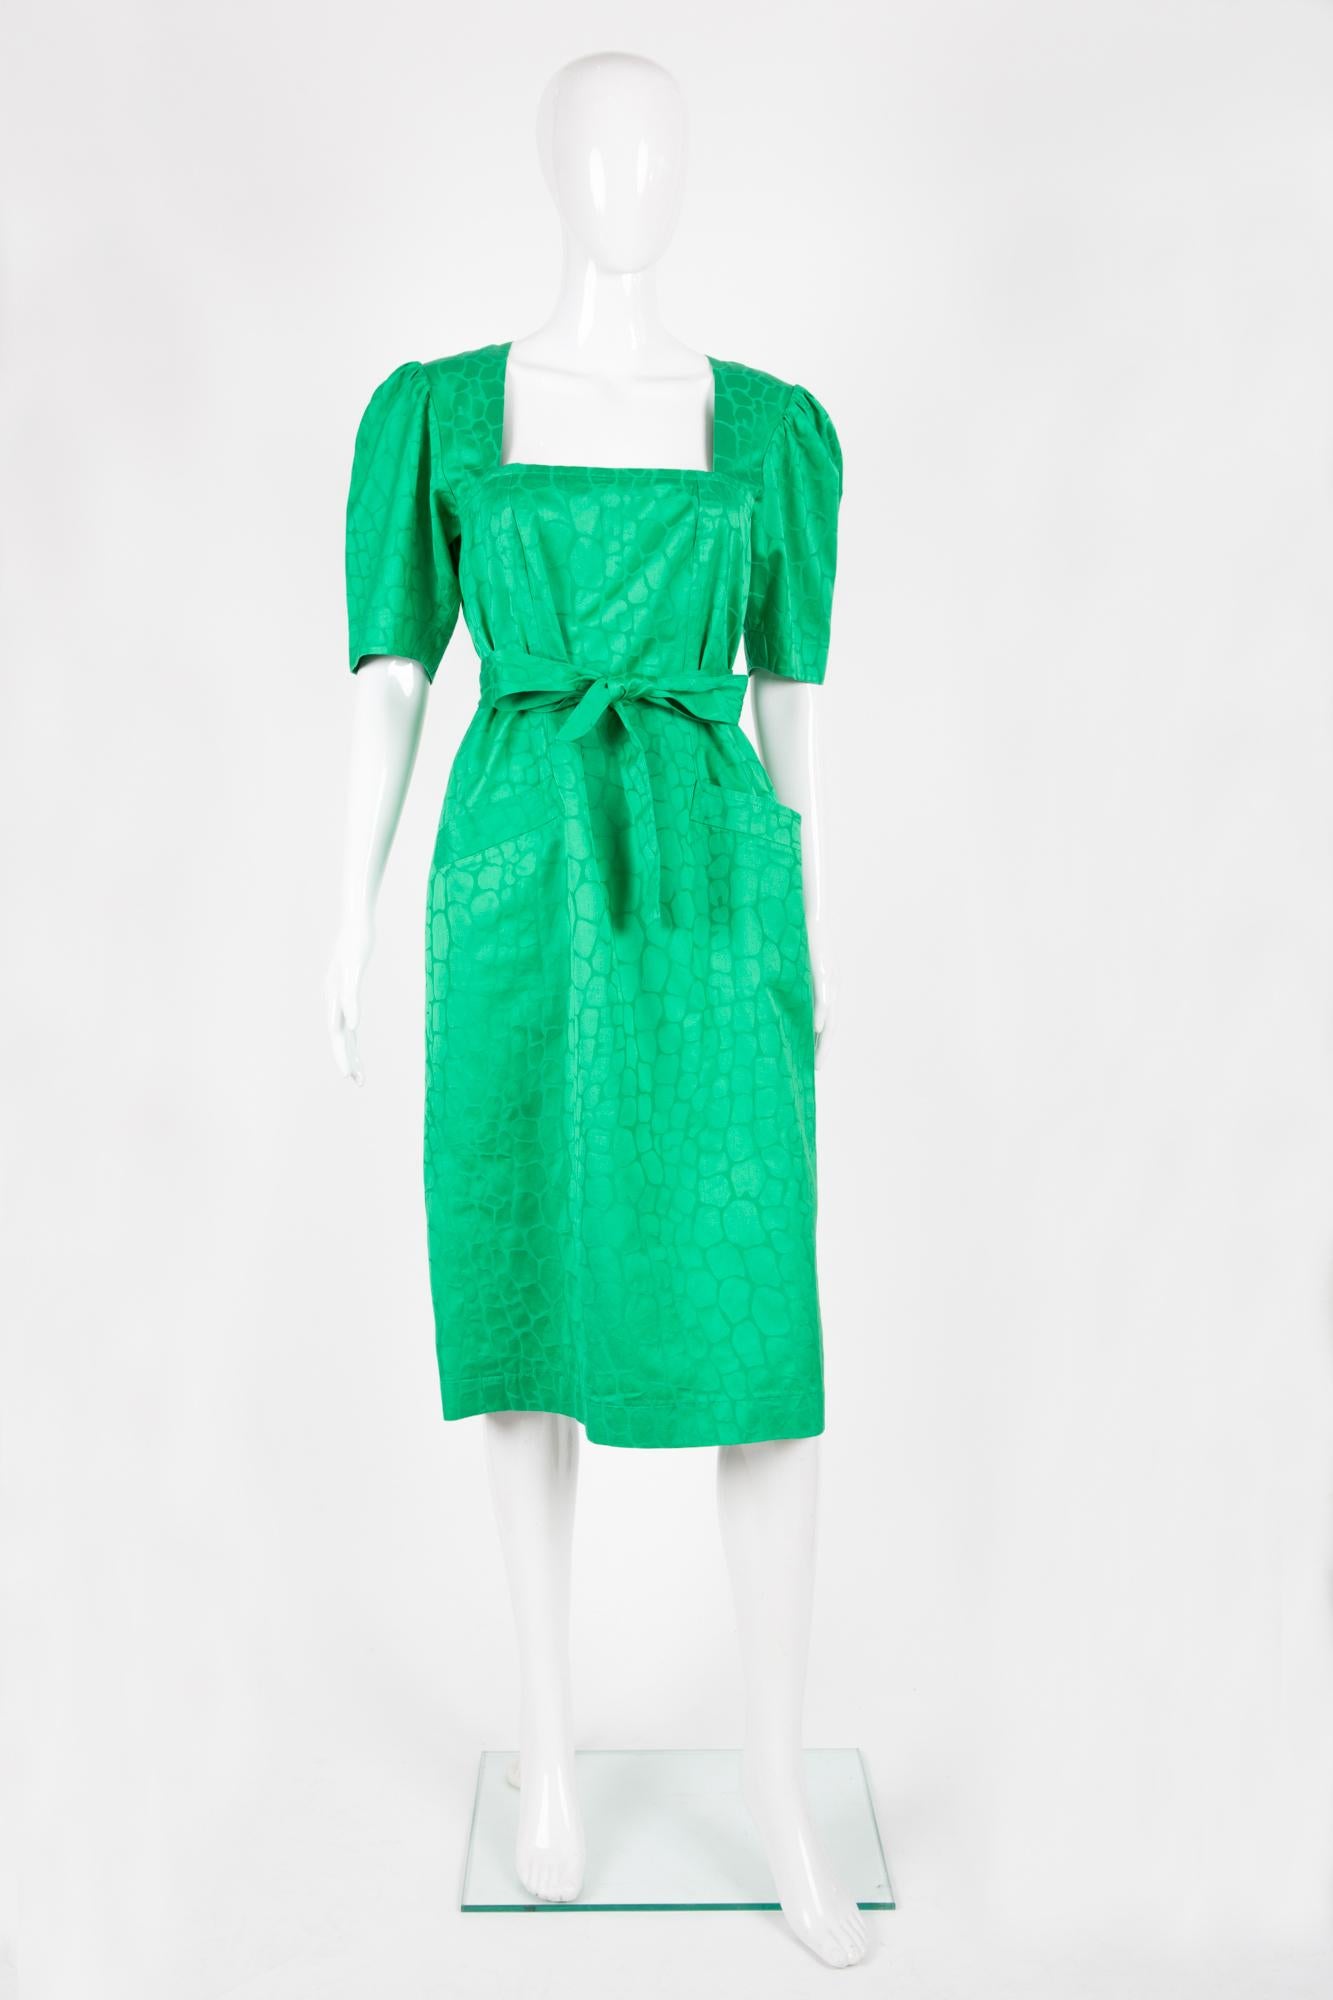 Yves Saint Laurent green dress featuring a jacquard pattern, a separated belt, back button opening, front pockets. 
100% cotton
In good vintage condition. Made in France. 
Label size 38fr/US6 /UK10
We guarantee you will receive this gorgeous item as